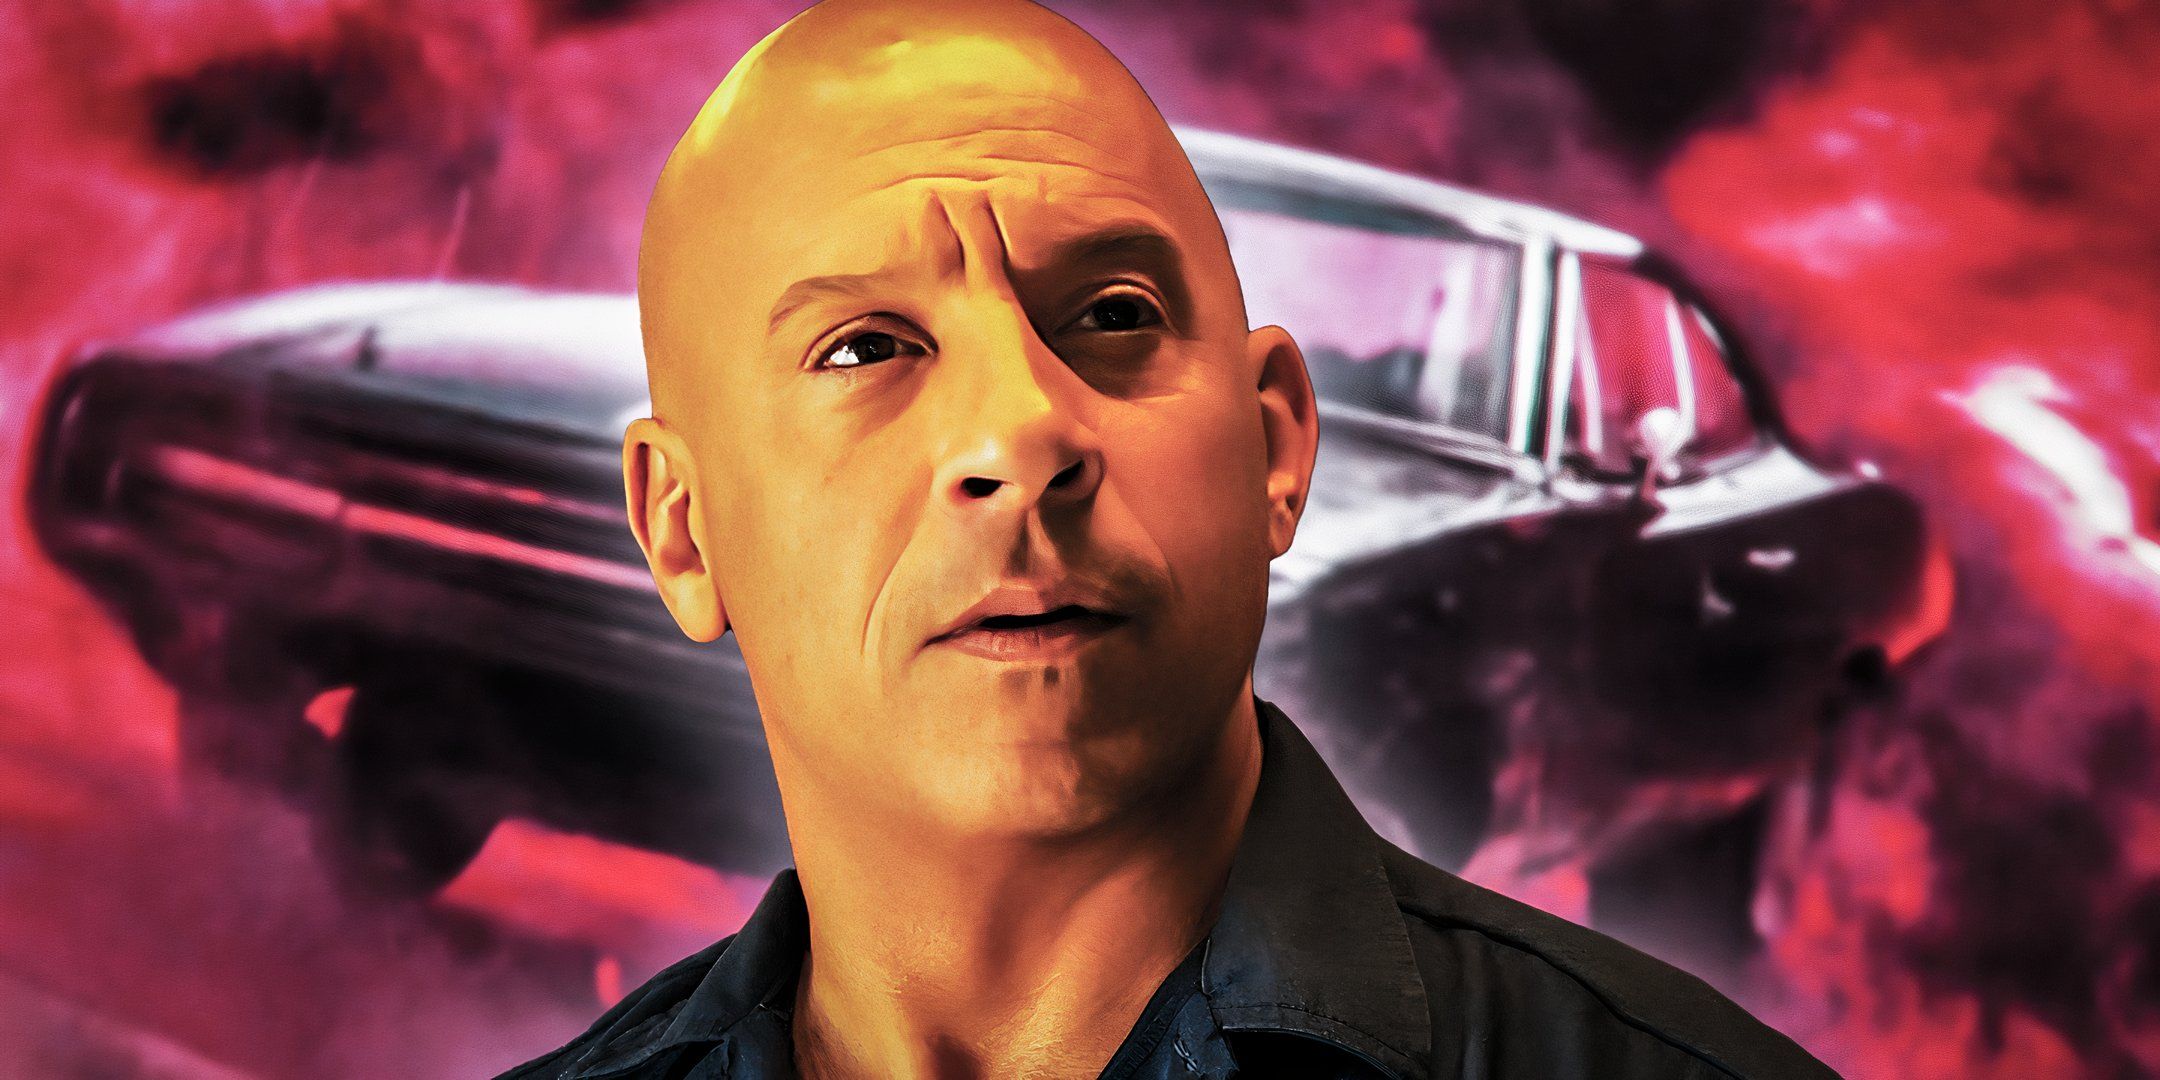 Vin Diesel as Dominic Toretto in front of a car in Fast & Furious